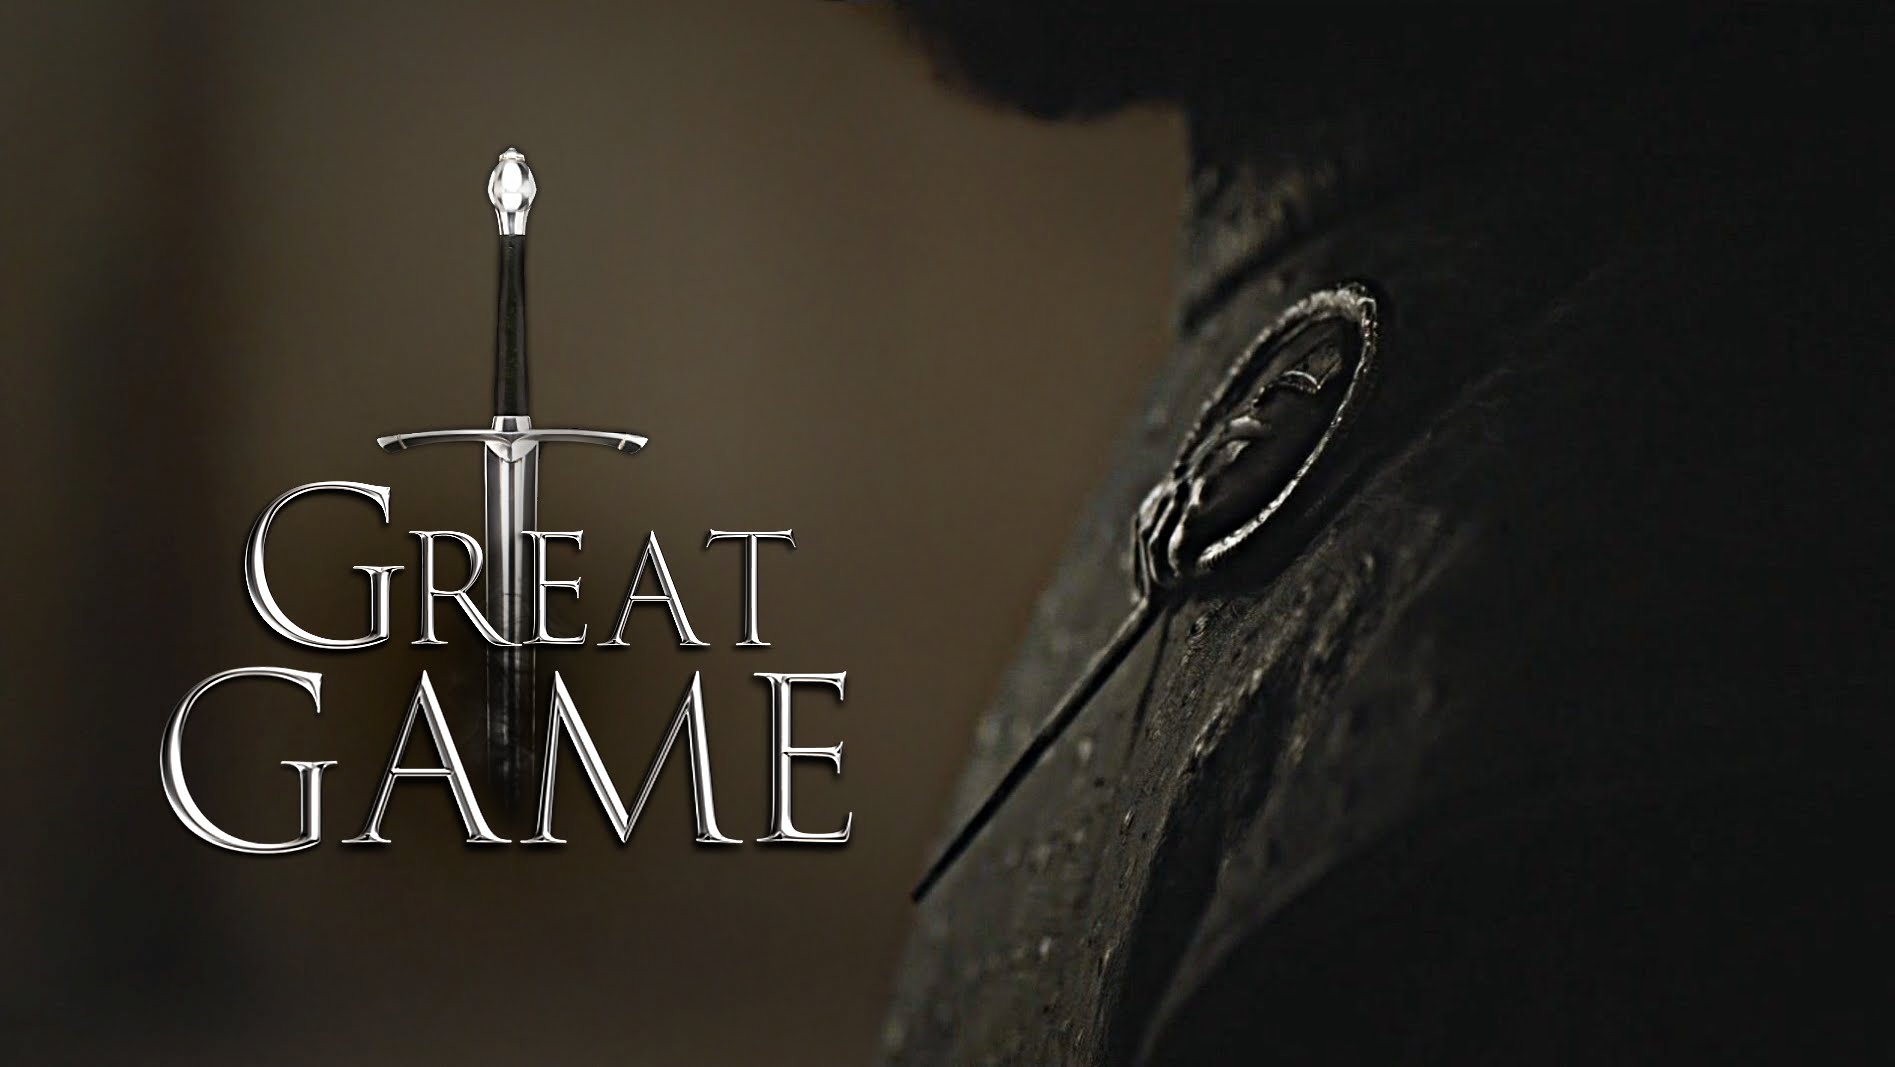 Game of Thrones | Great Game (ფან ვიდეო)